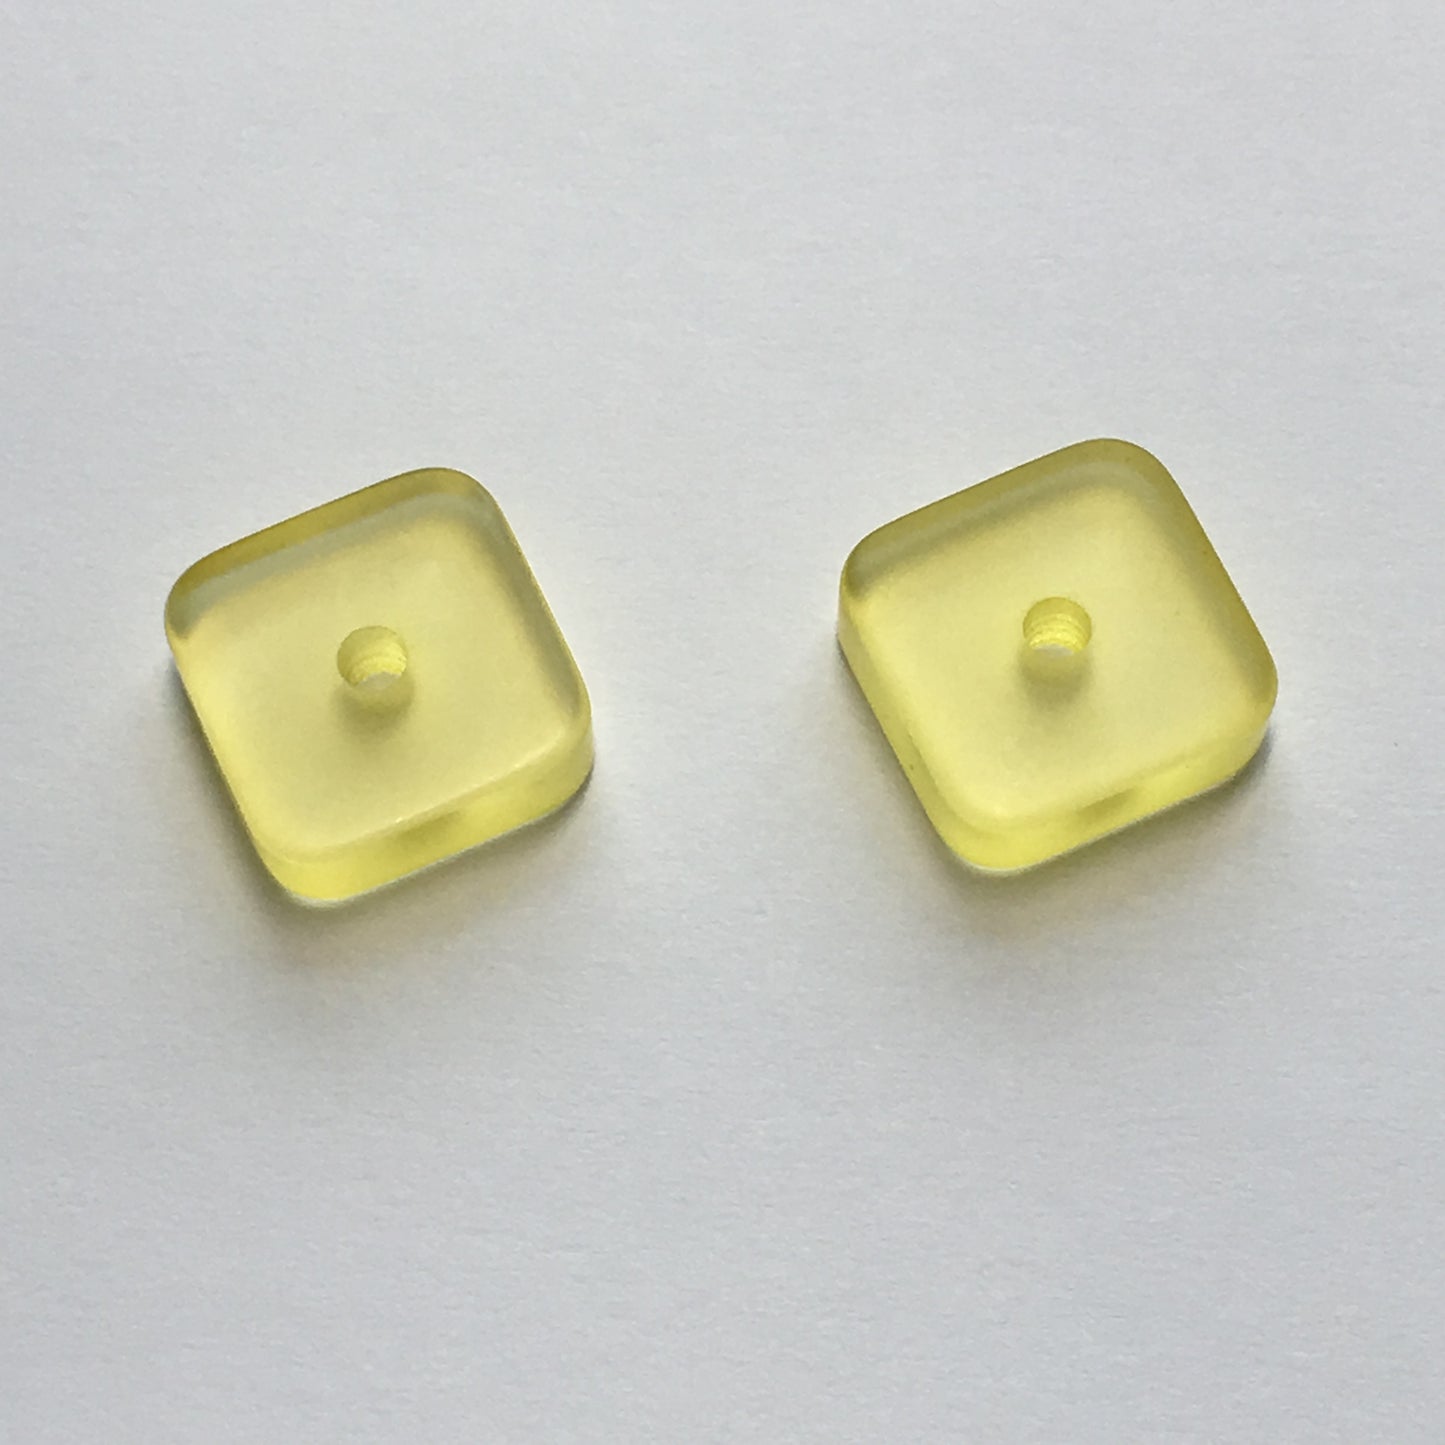 Translucent Yellow Acrylic Square Flat Center-Drilled Beads, 14 x 5 mm - 2 Beads